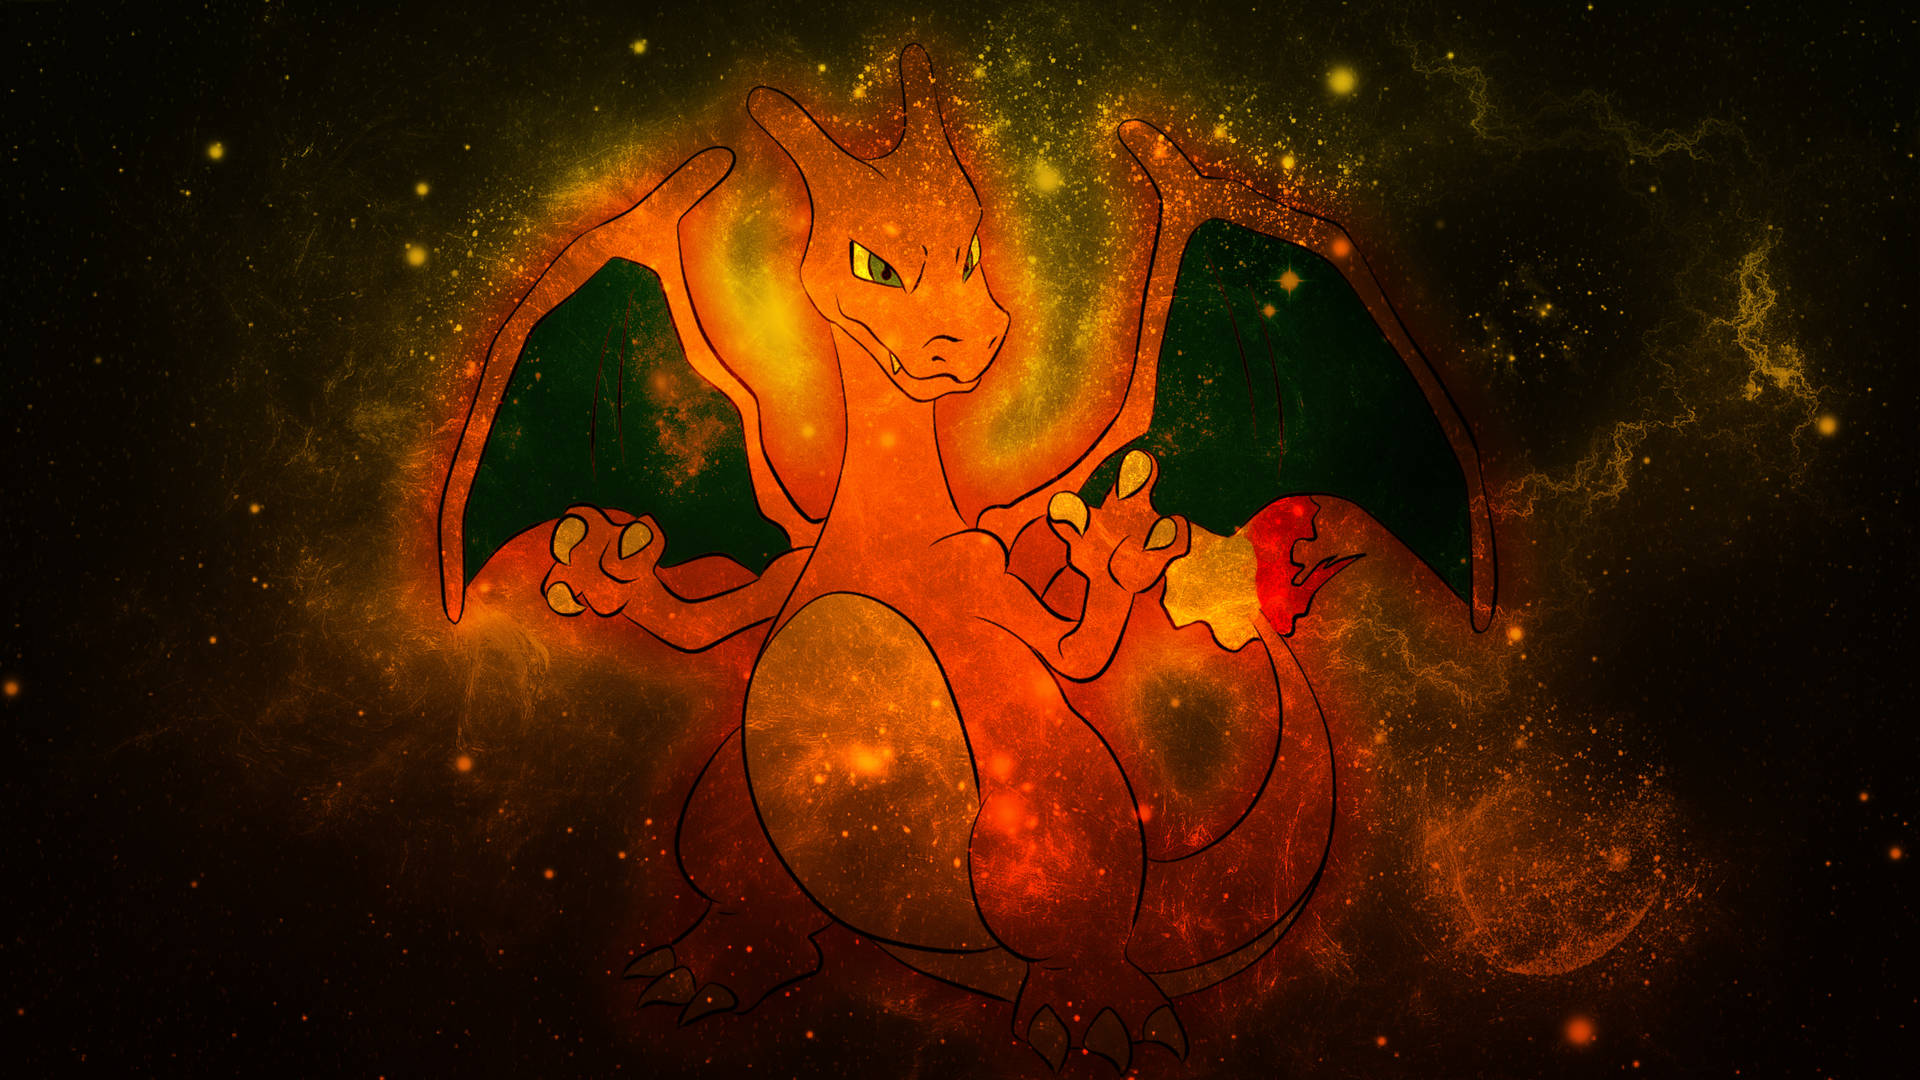 Feel the Magic of Charizard in this Translucent Galaxy Wallpaper